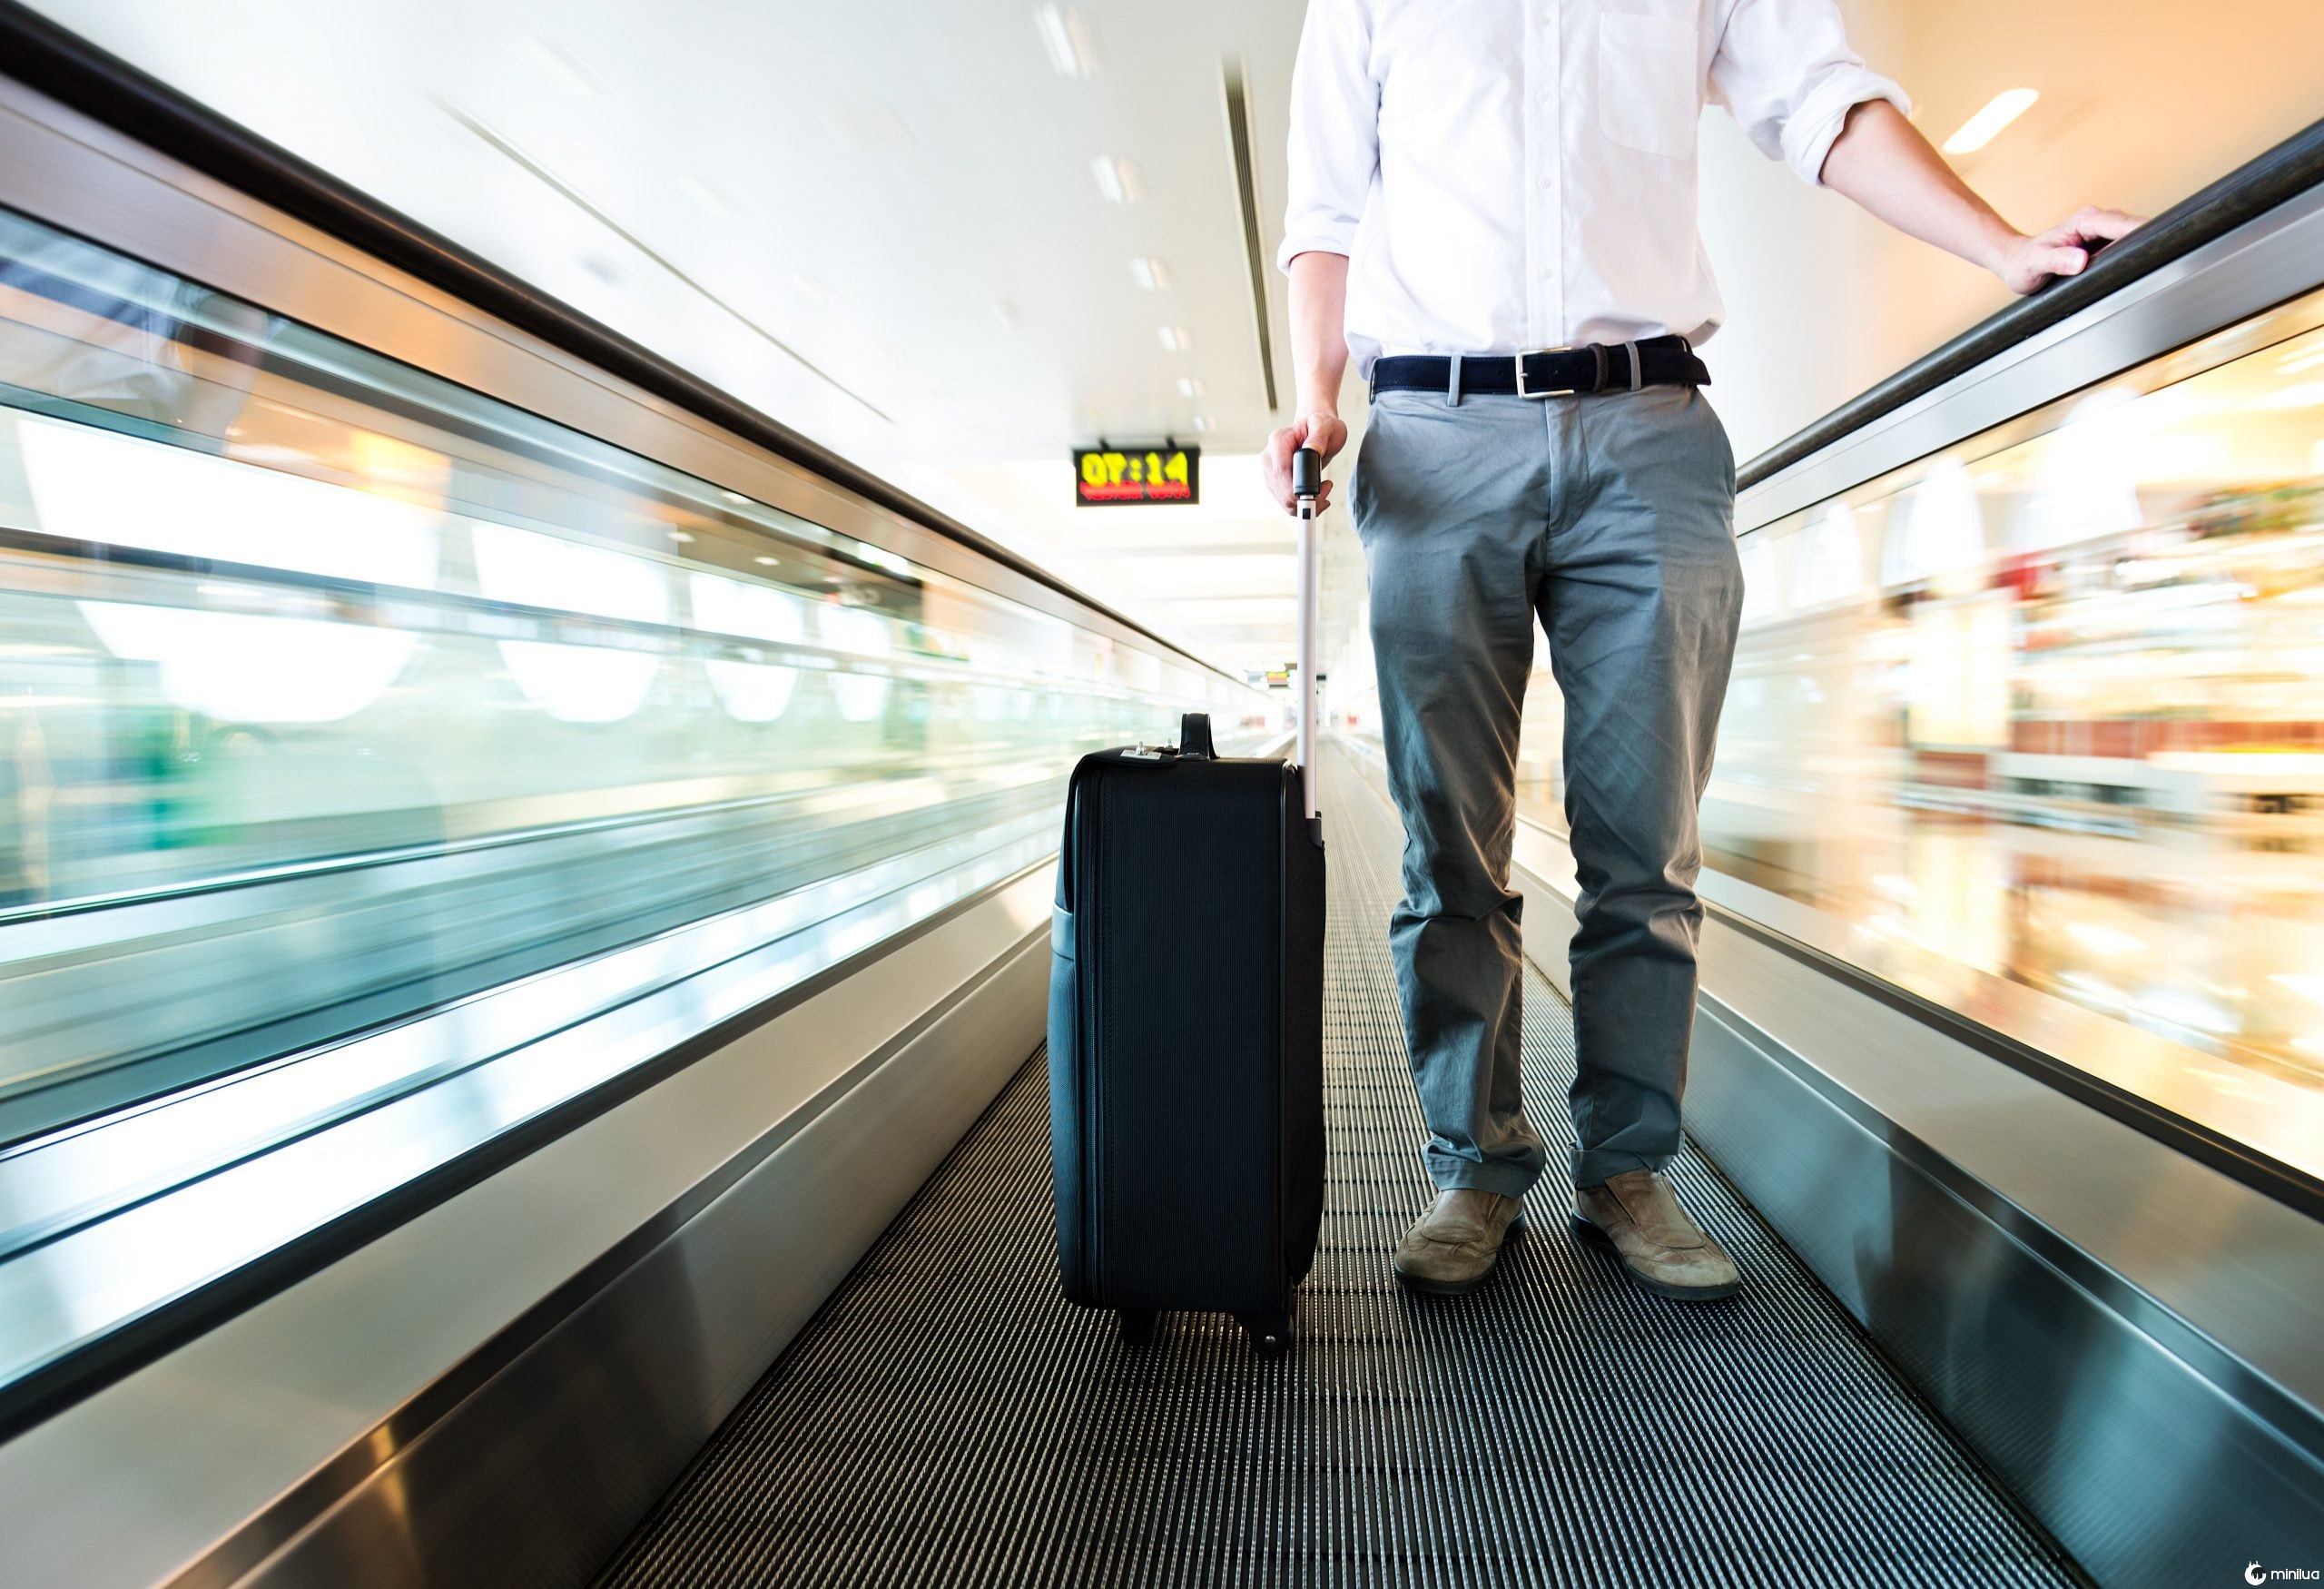 There are ways to make the airport process more pleasant for yourself and fellow travelers.&nbsp;